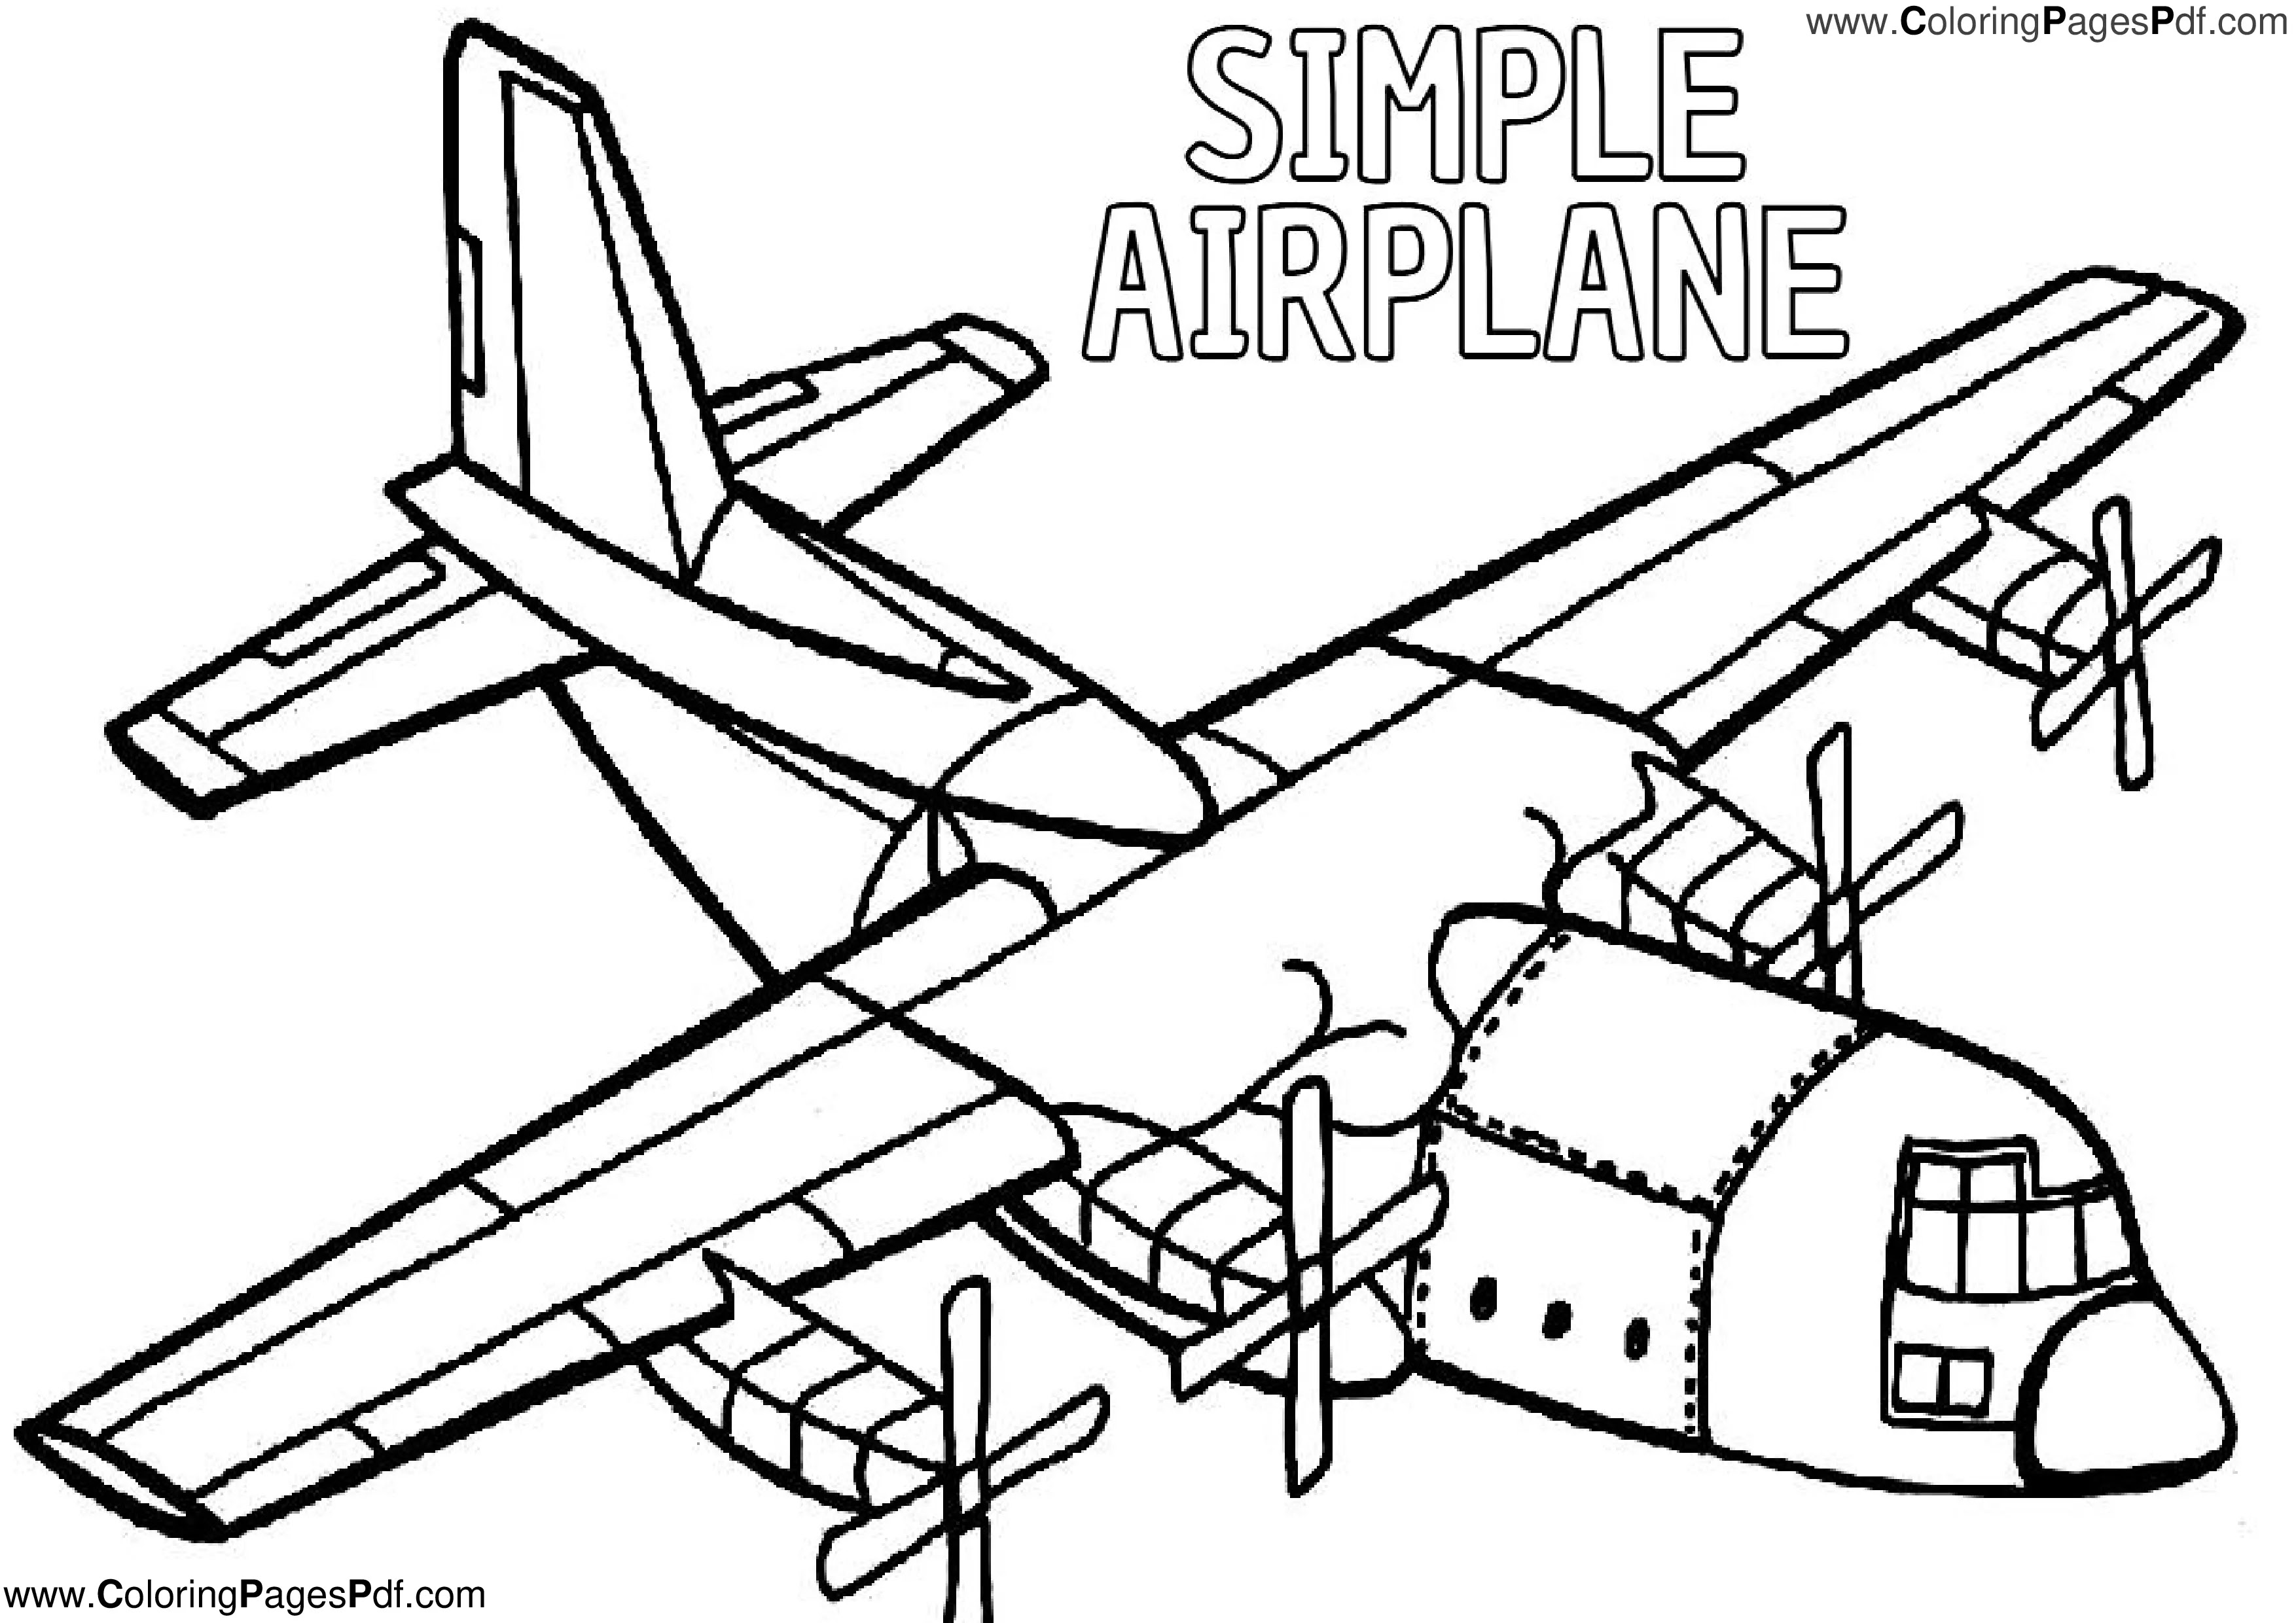 Simple airplane coloring pages